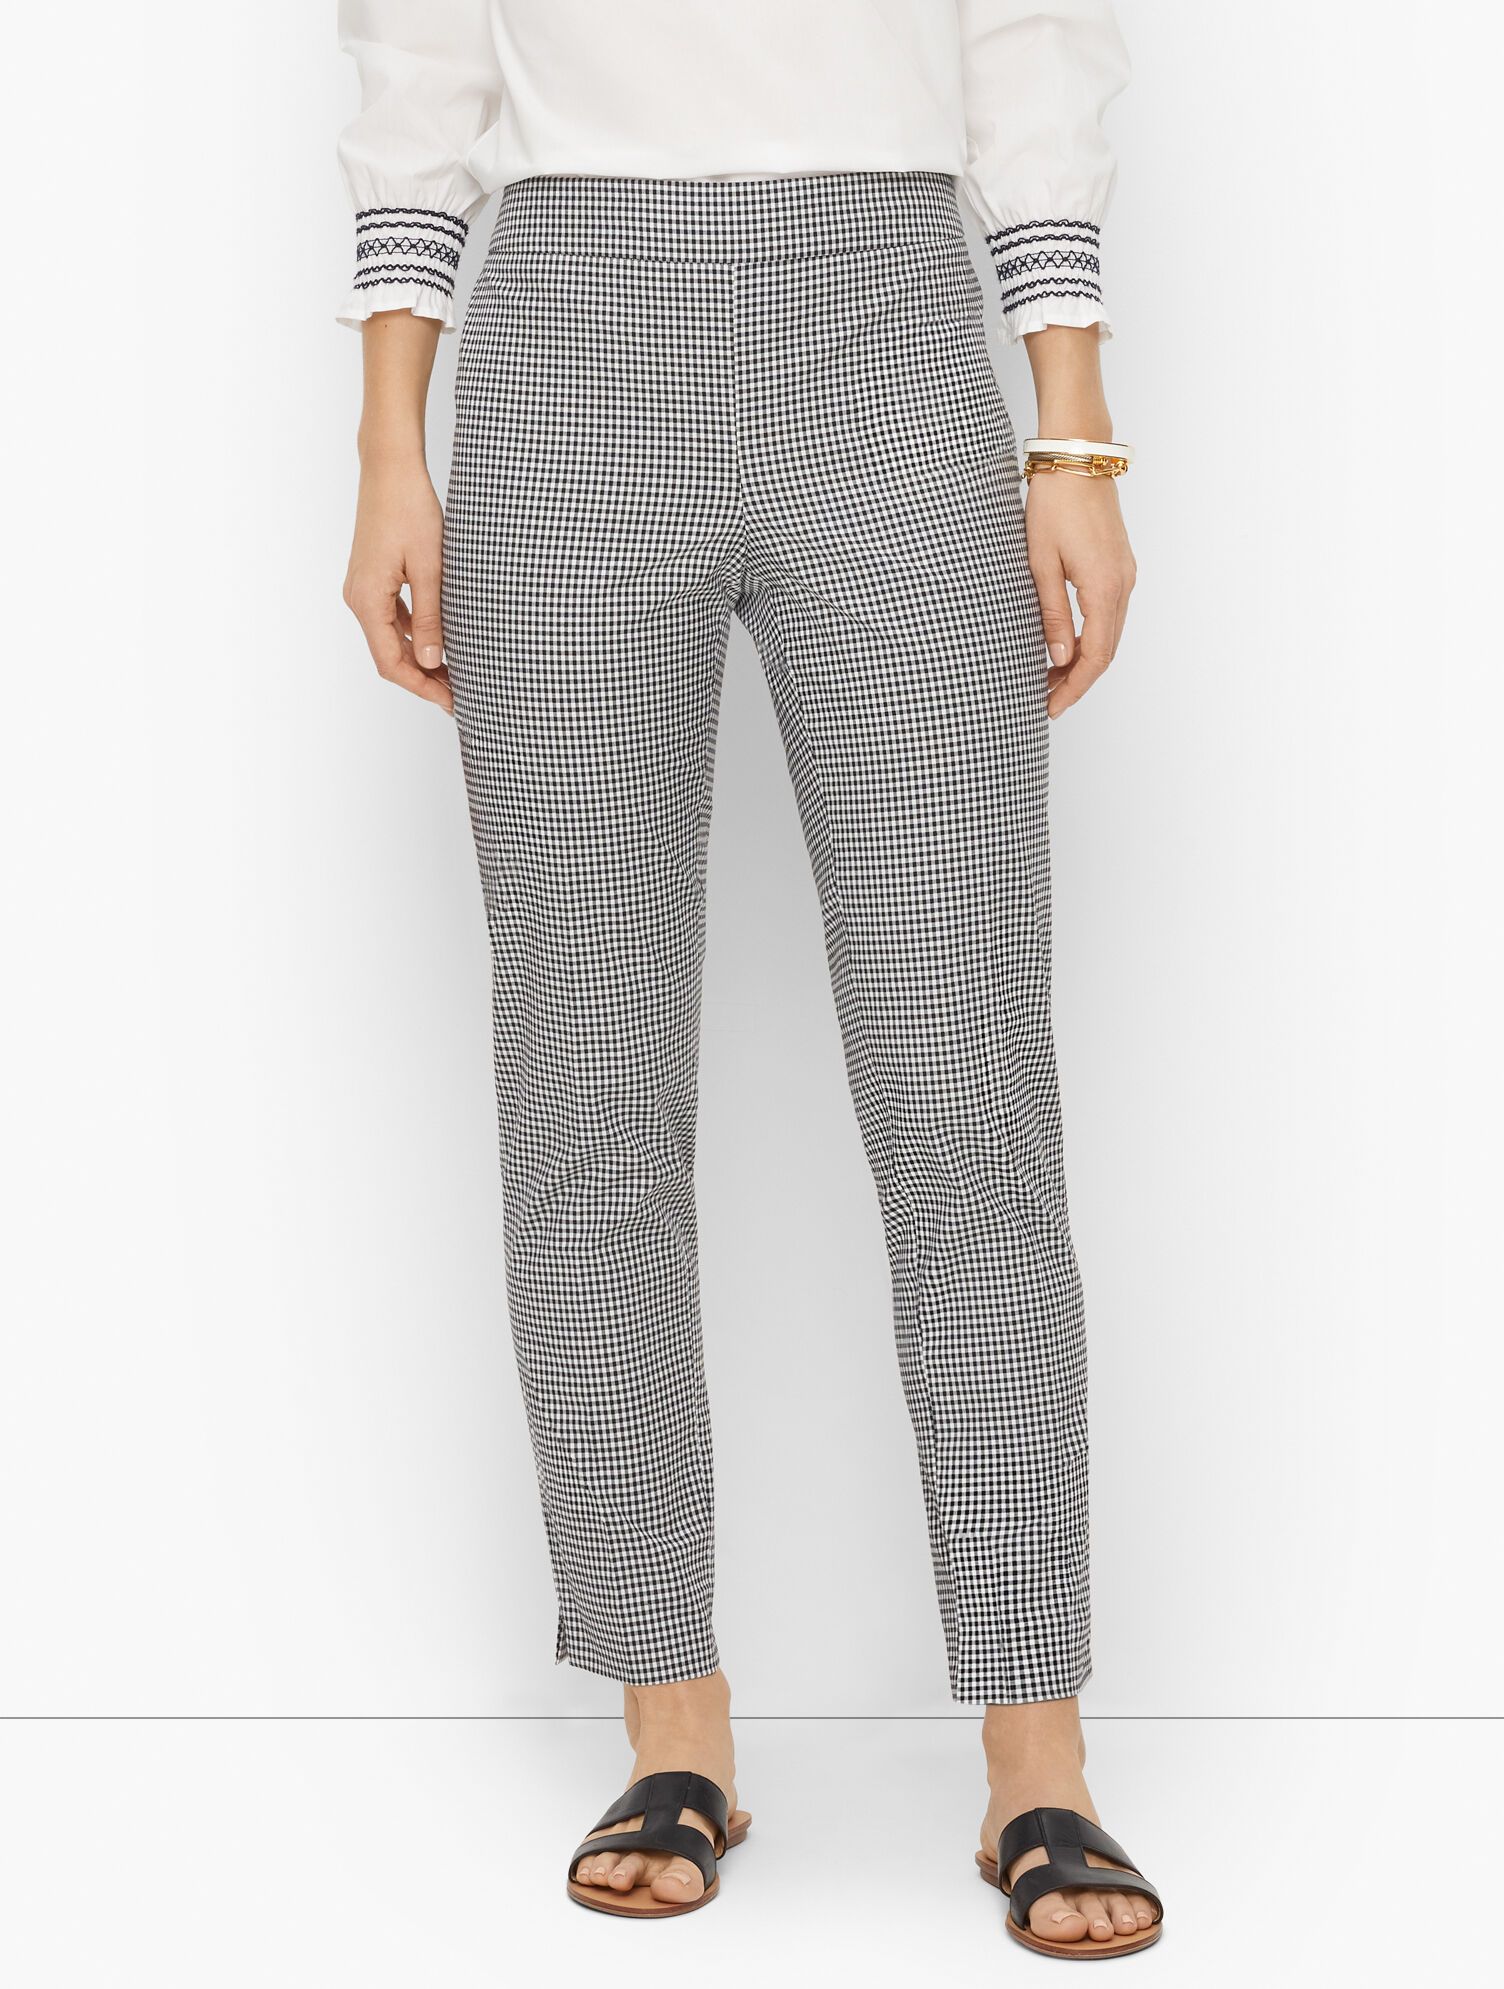 Talbots Chatham Ankle Pants - Tailored Check | Talbots